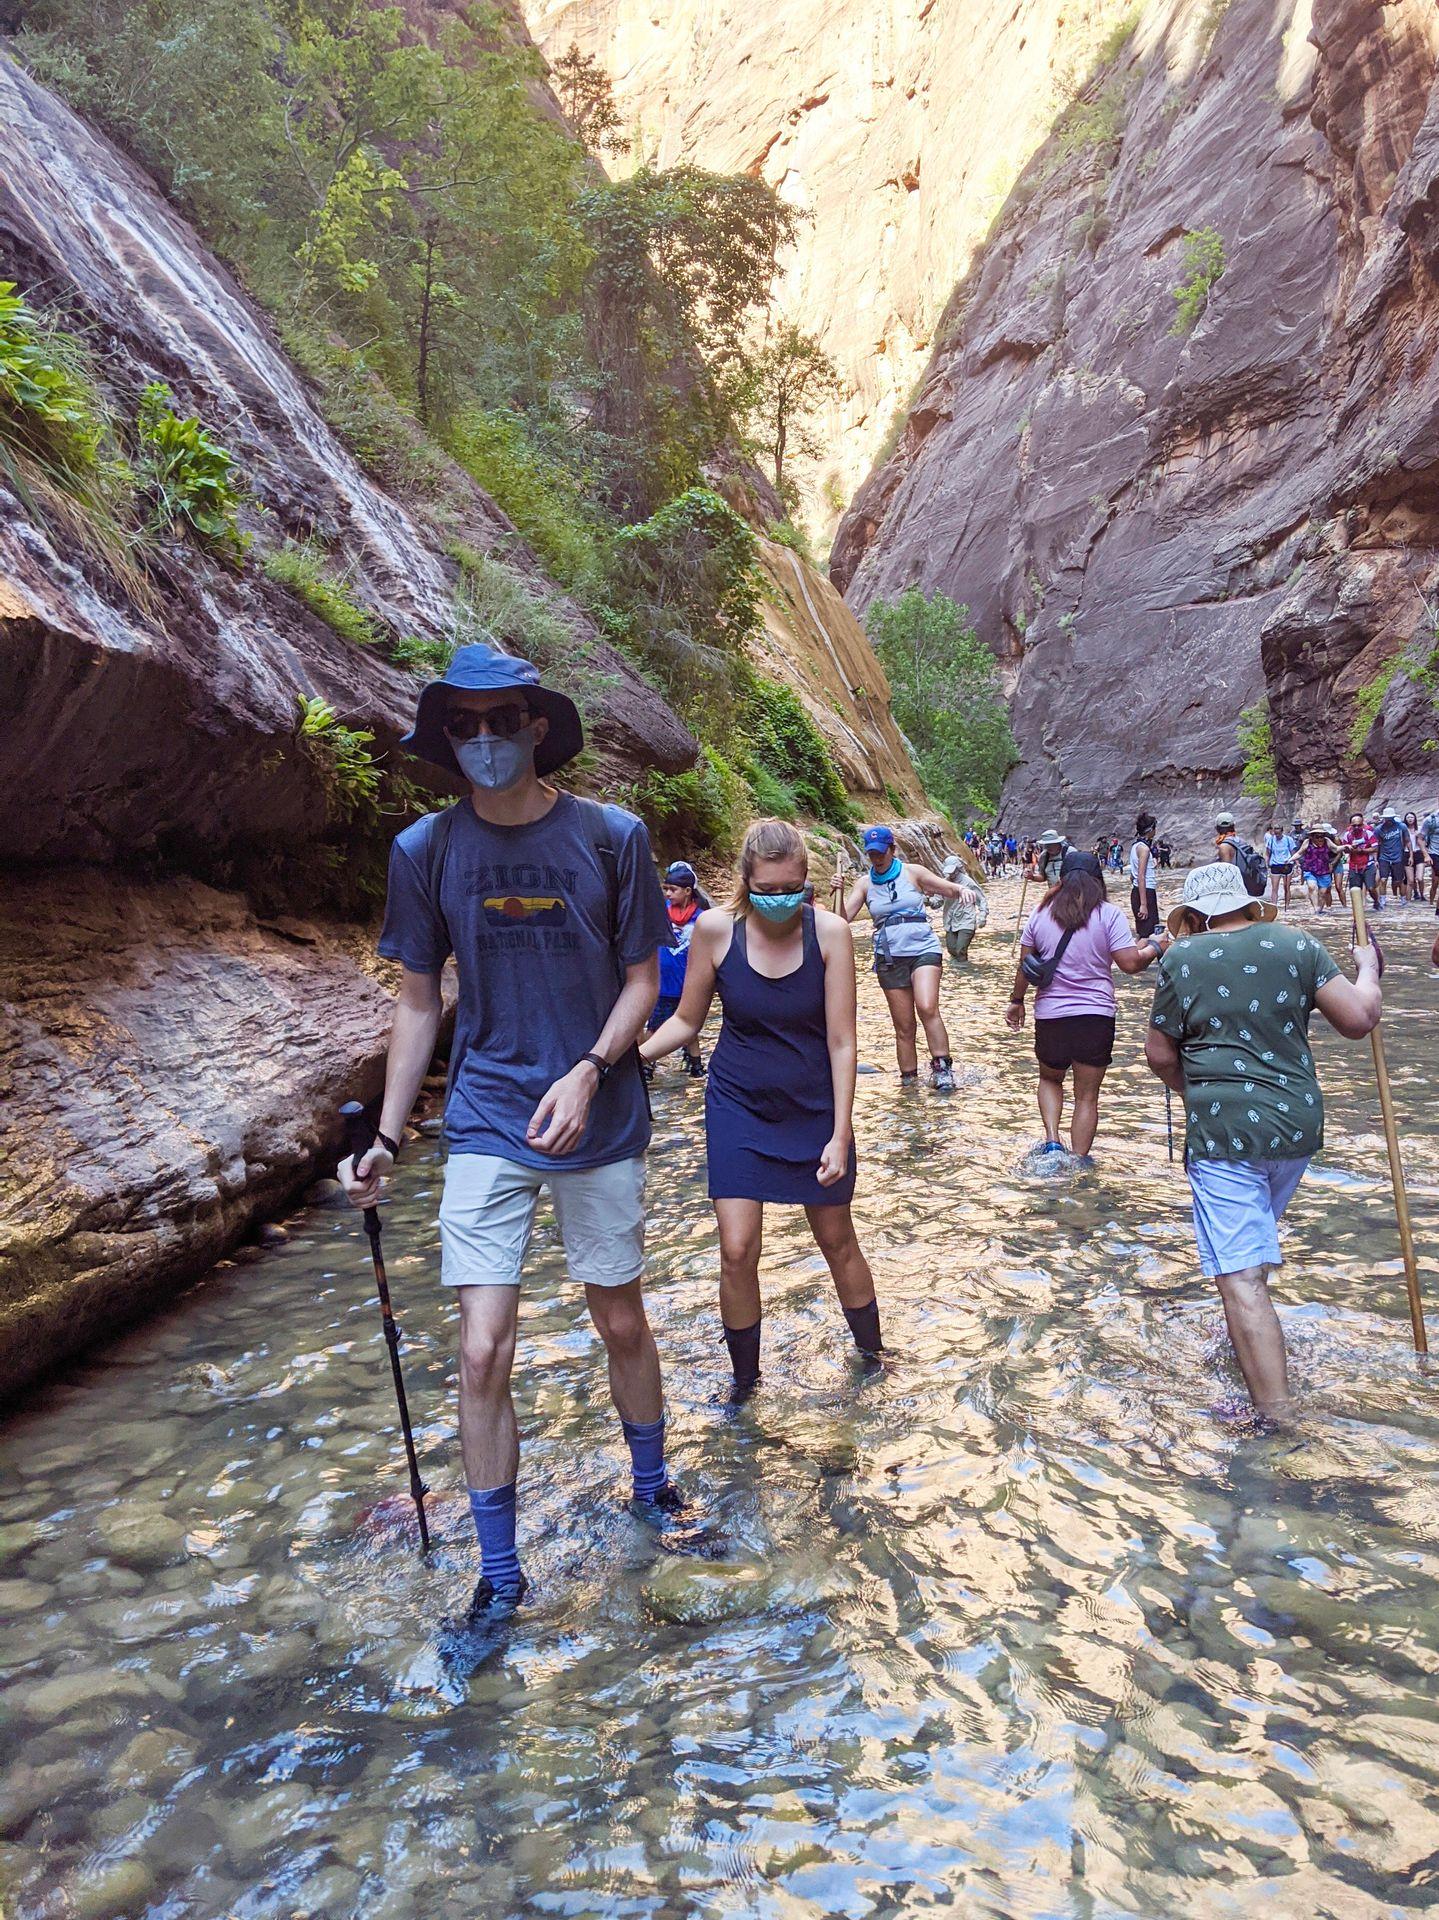 A view of how crowded The Narrows was in summer 2020. There are many people in the water of the canyon.